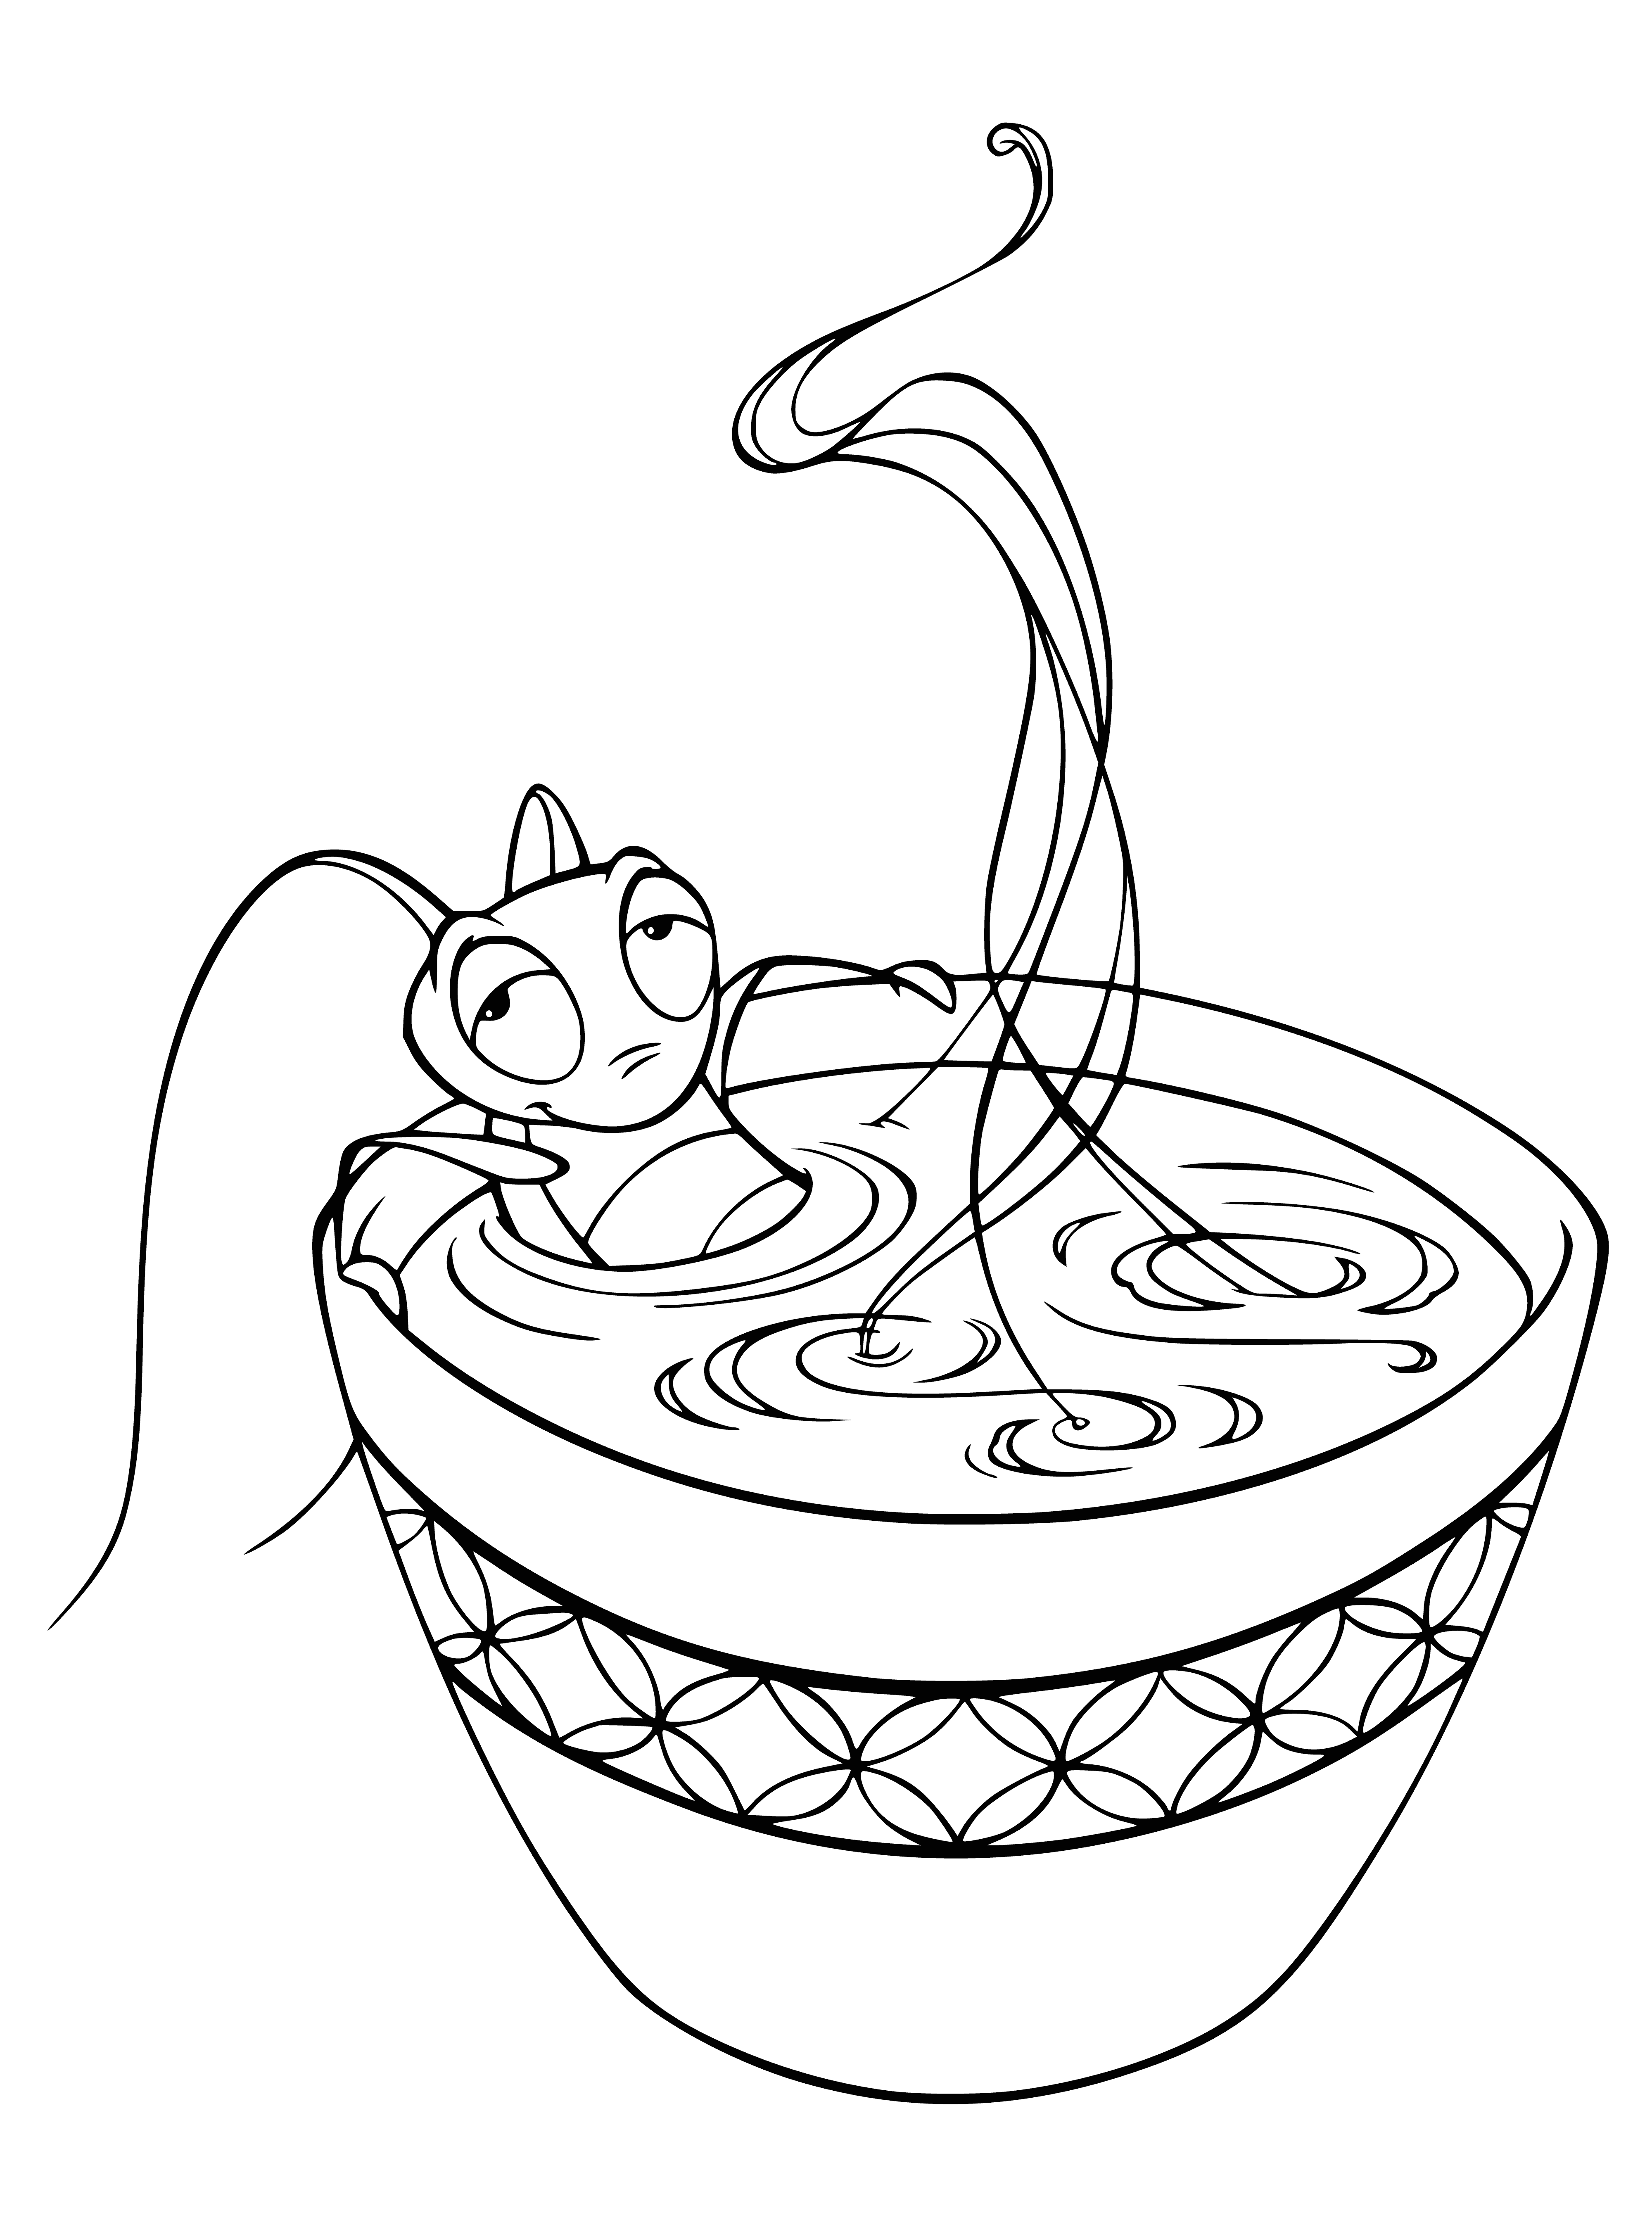 Happy glow coloring page